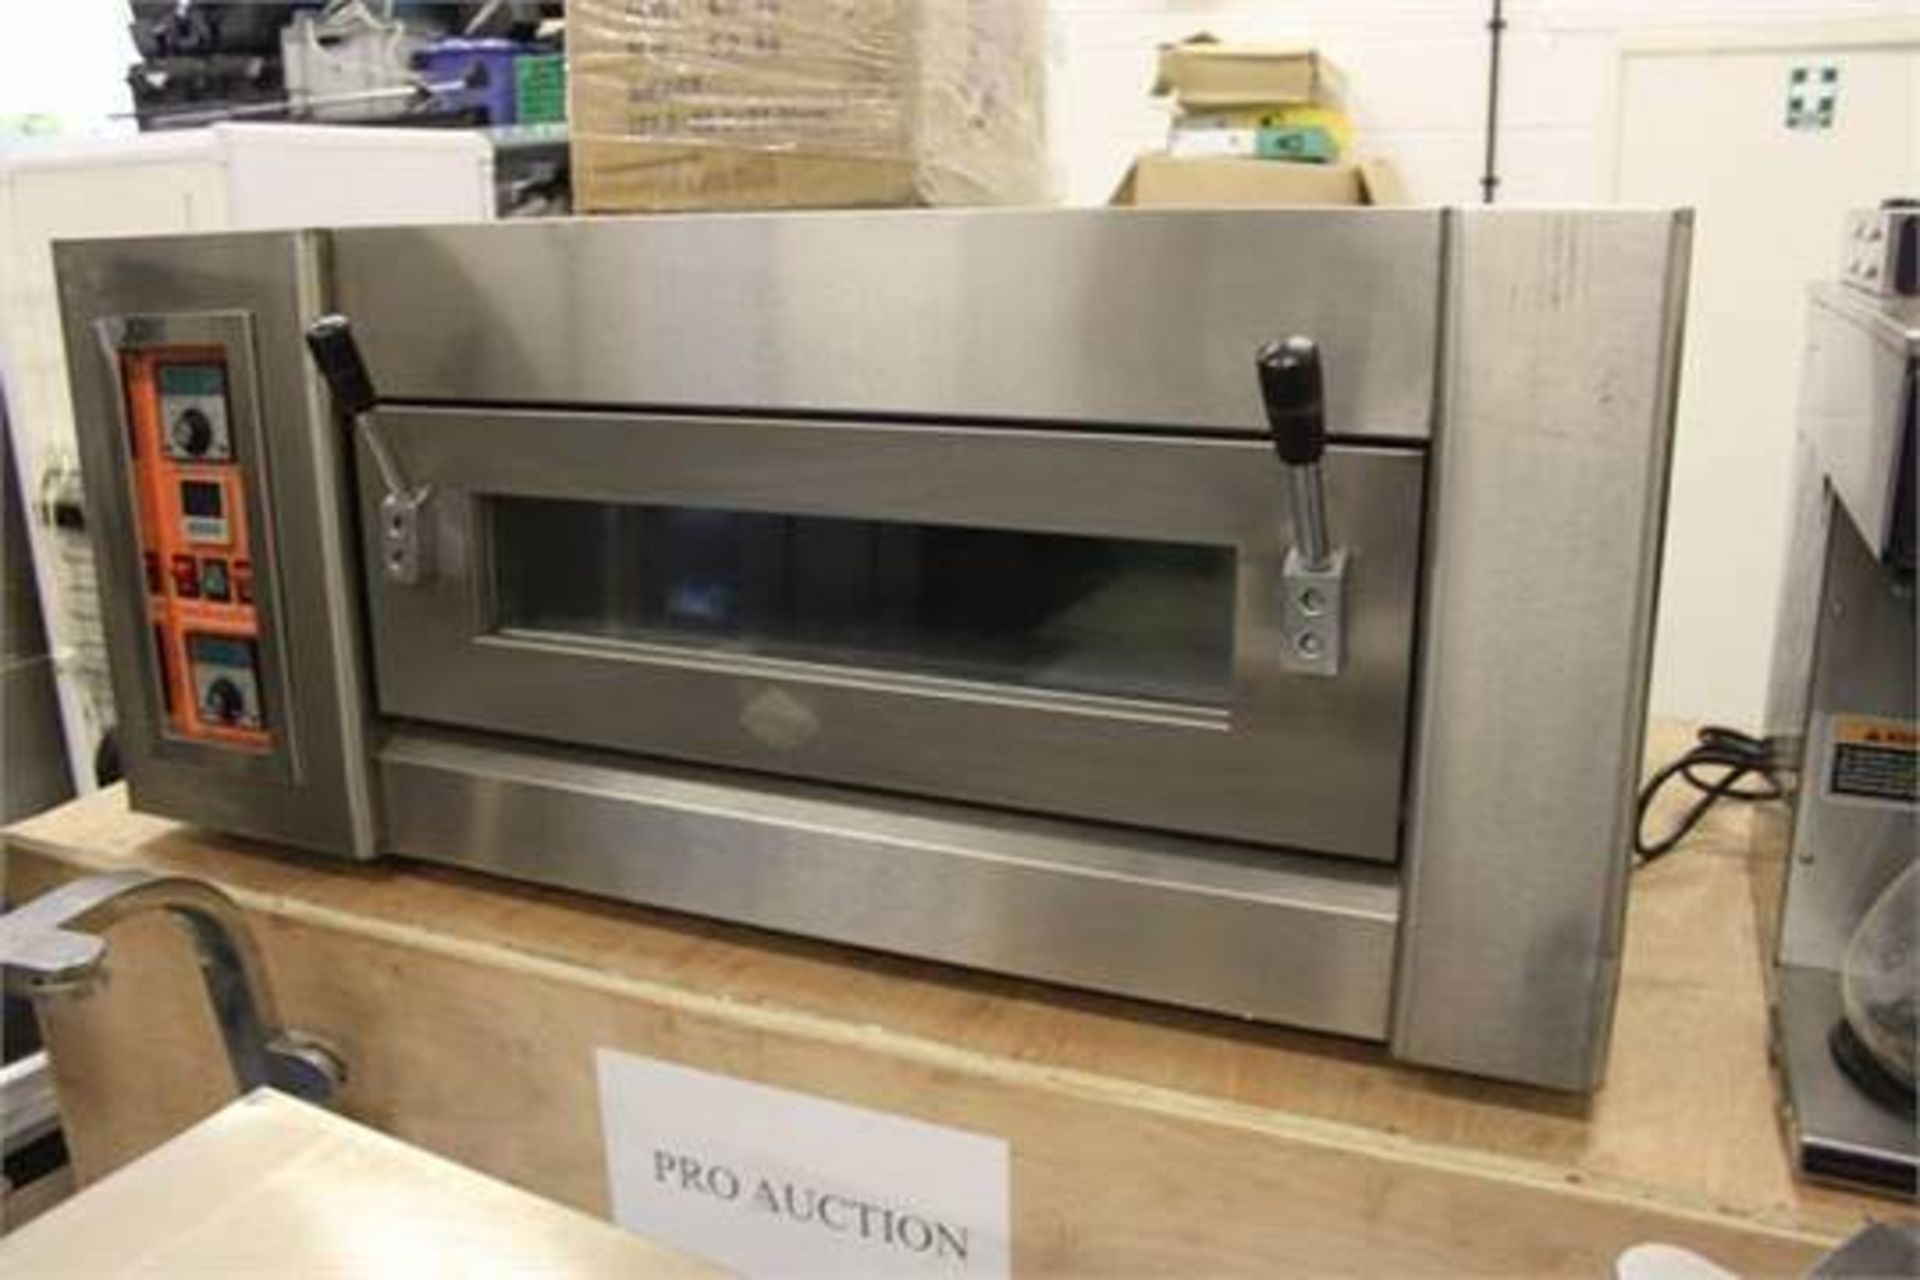 NFC series YXD-2 6.5kW stainless steel deck pizza oven chamber opening 660mm x 150mm overall